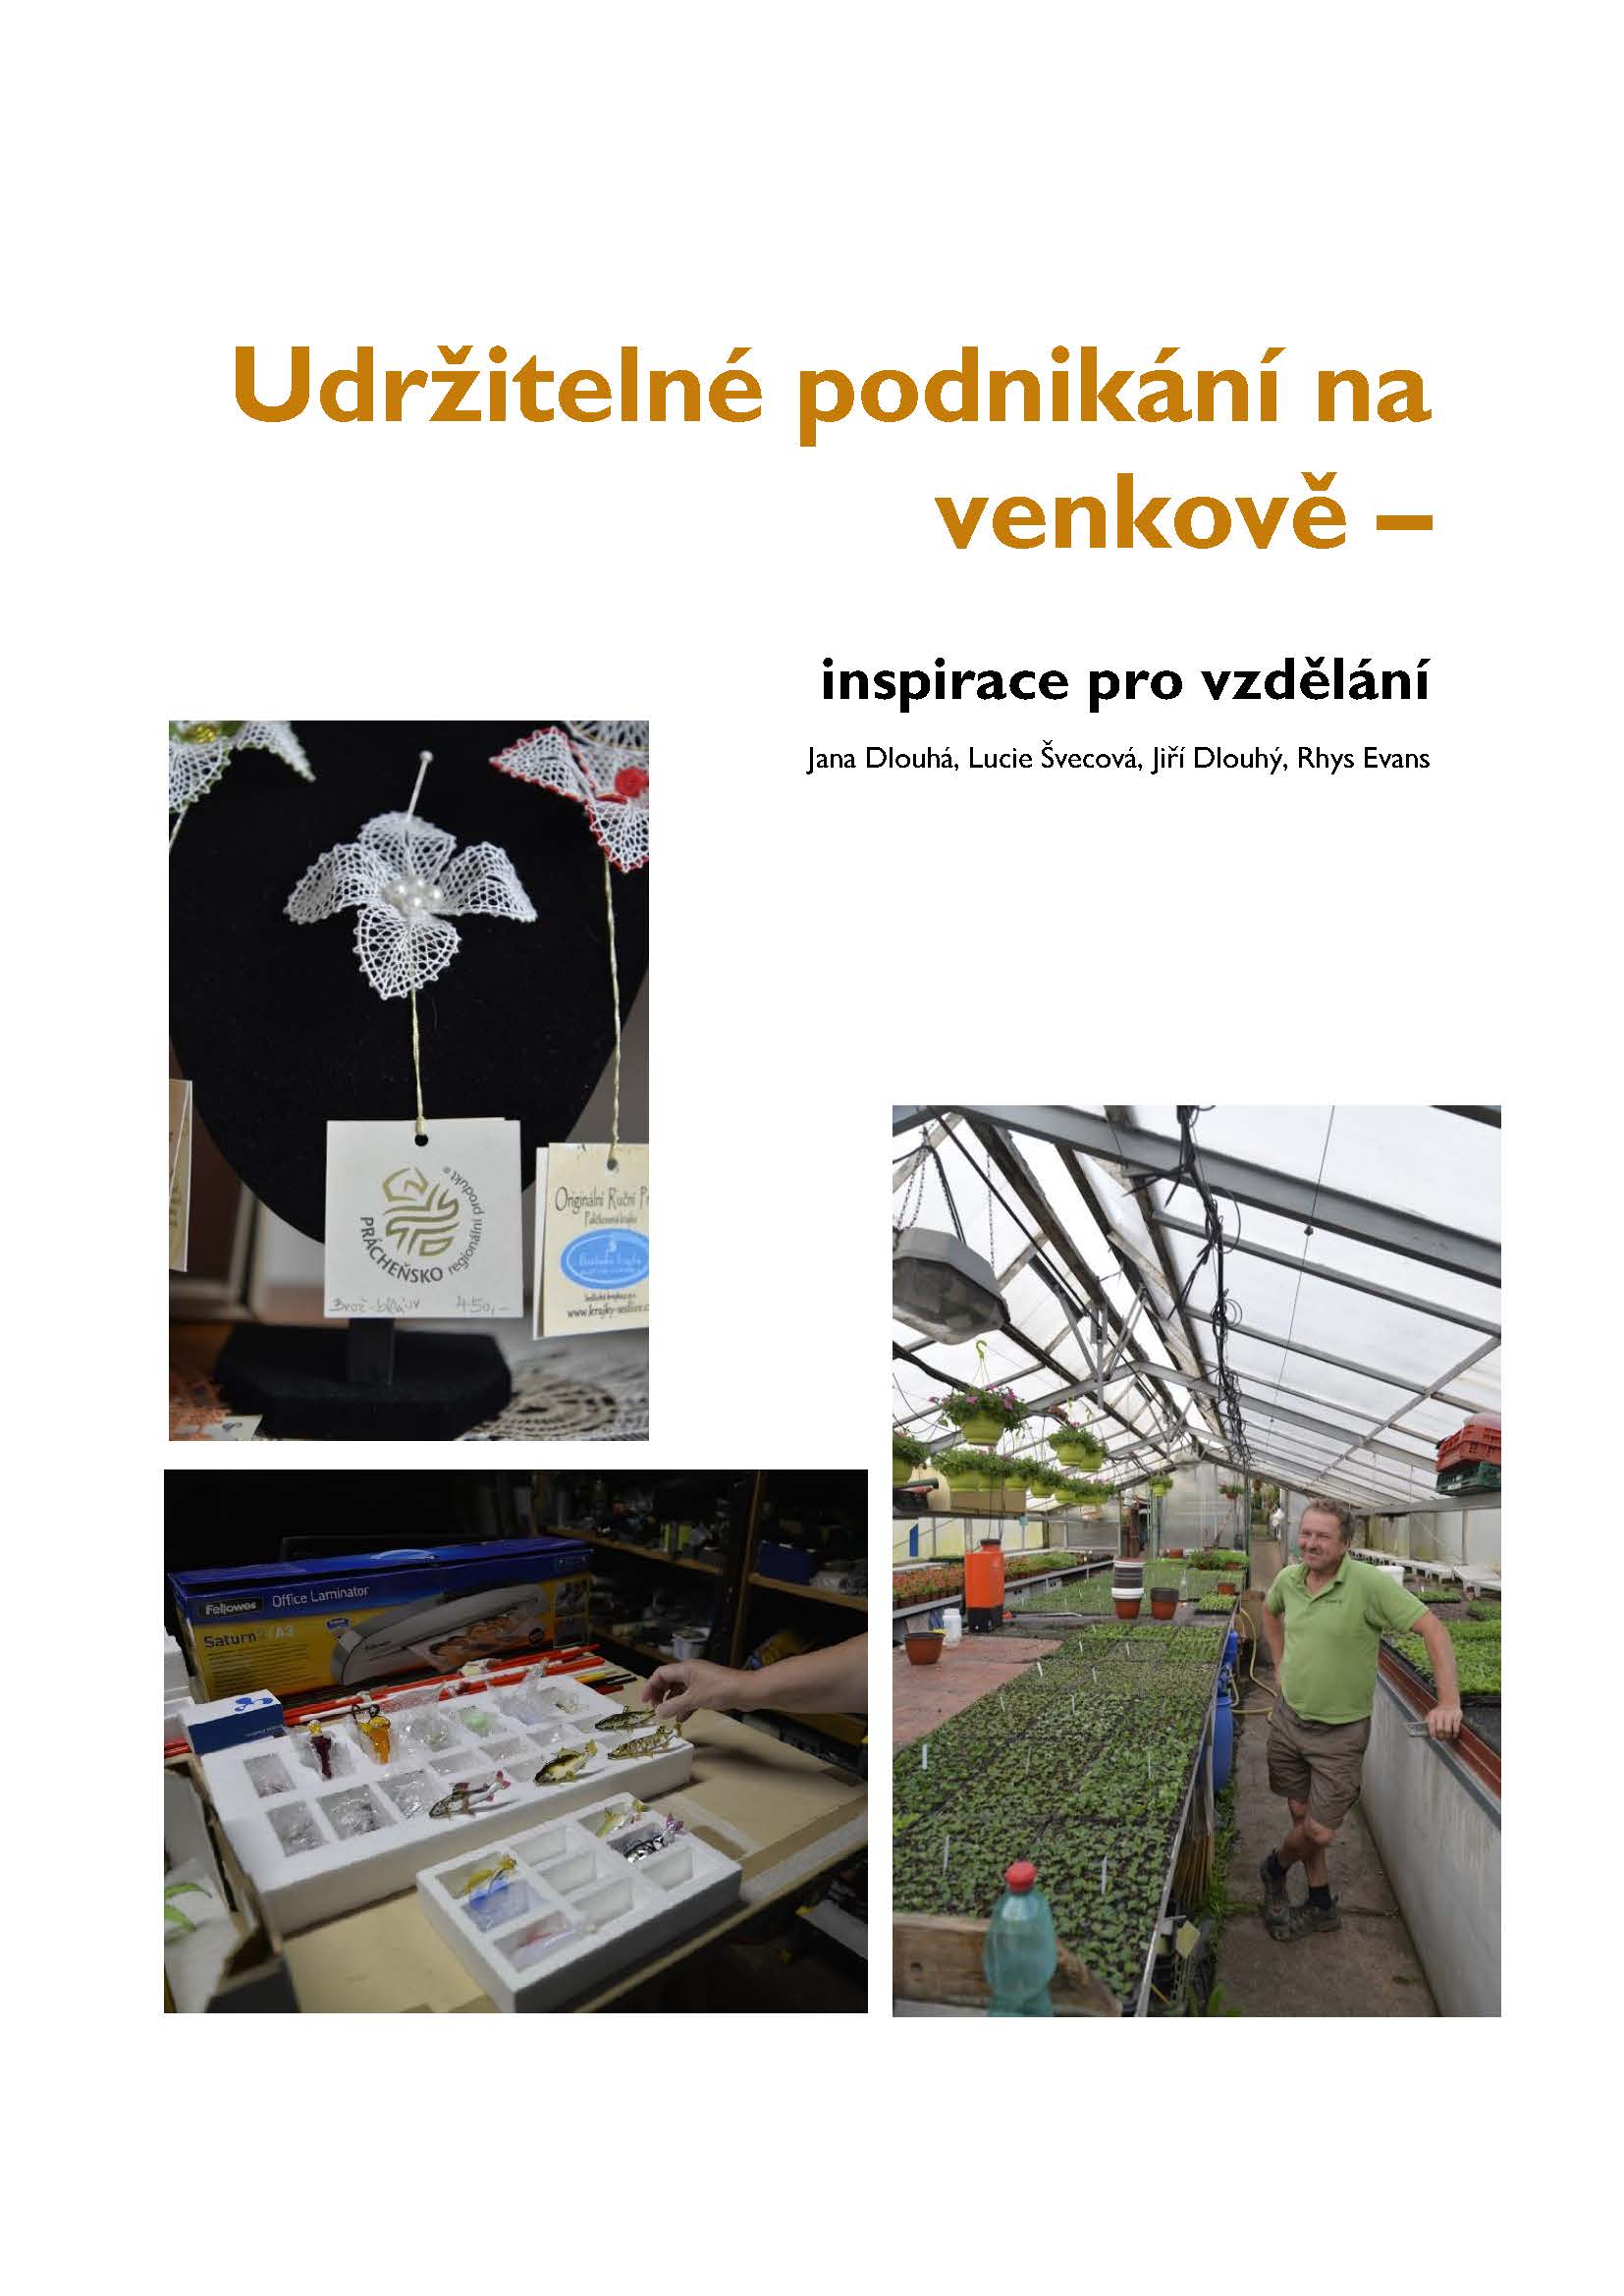 New book Sustainable rural entrepreneurship – inspiration for education was published